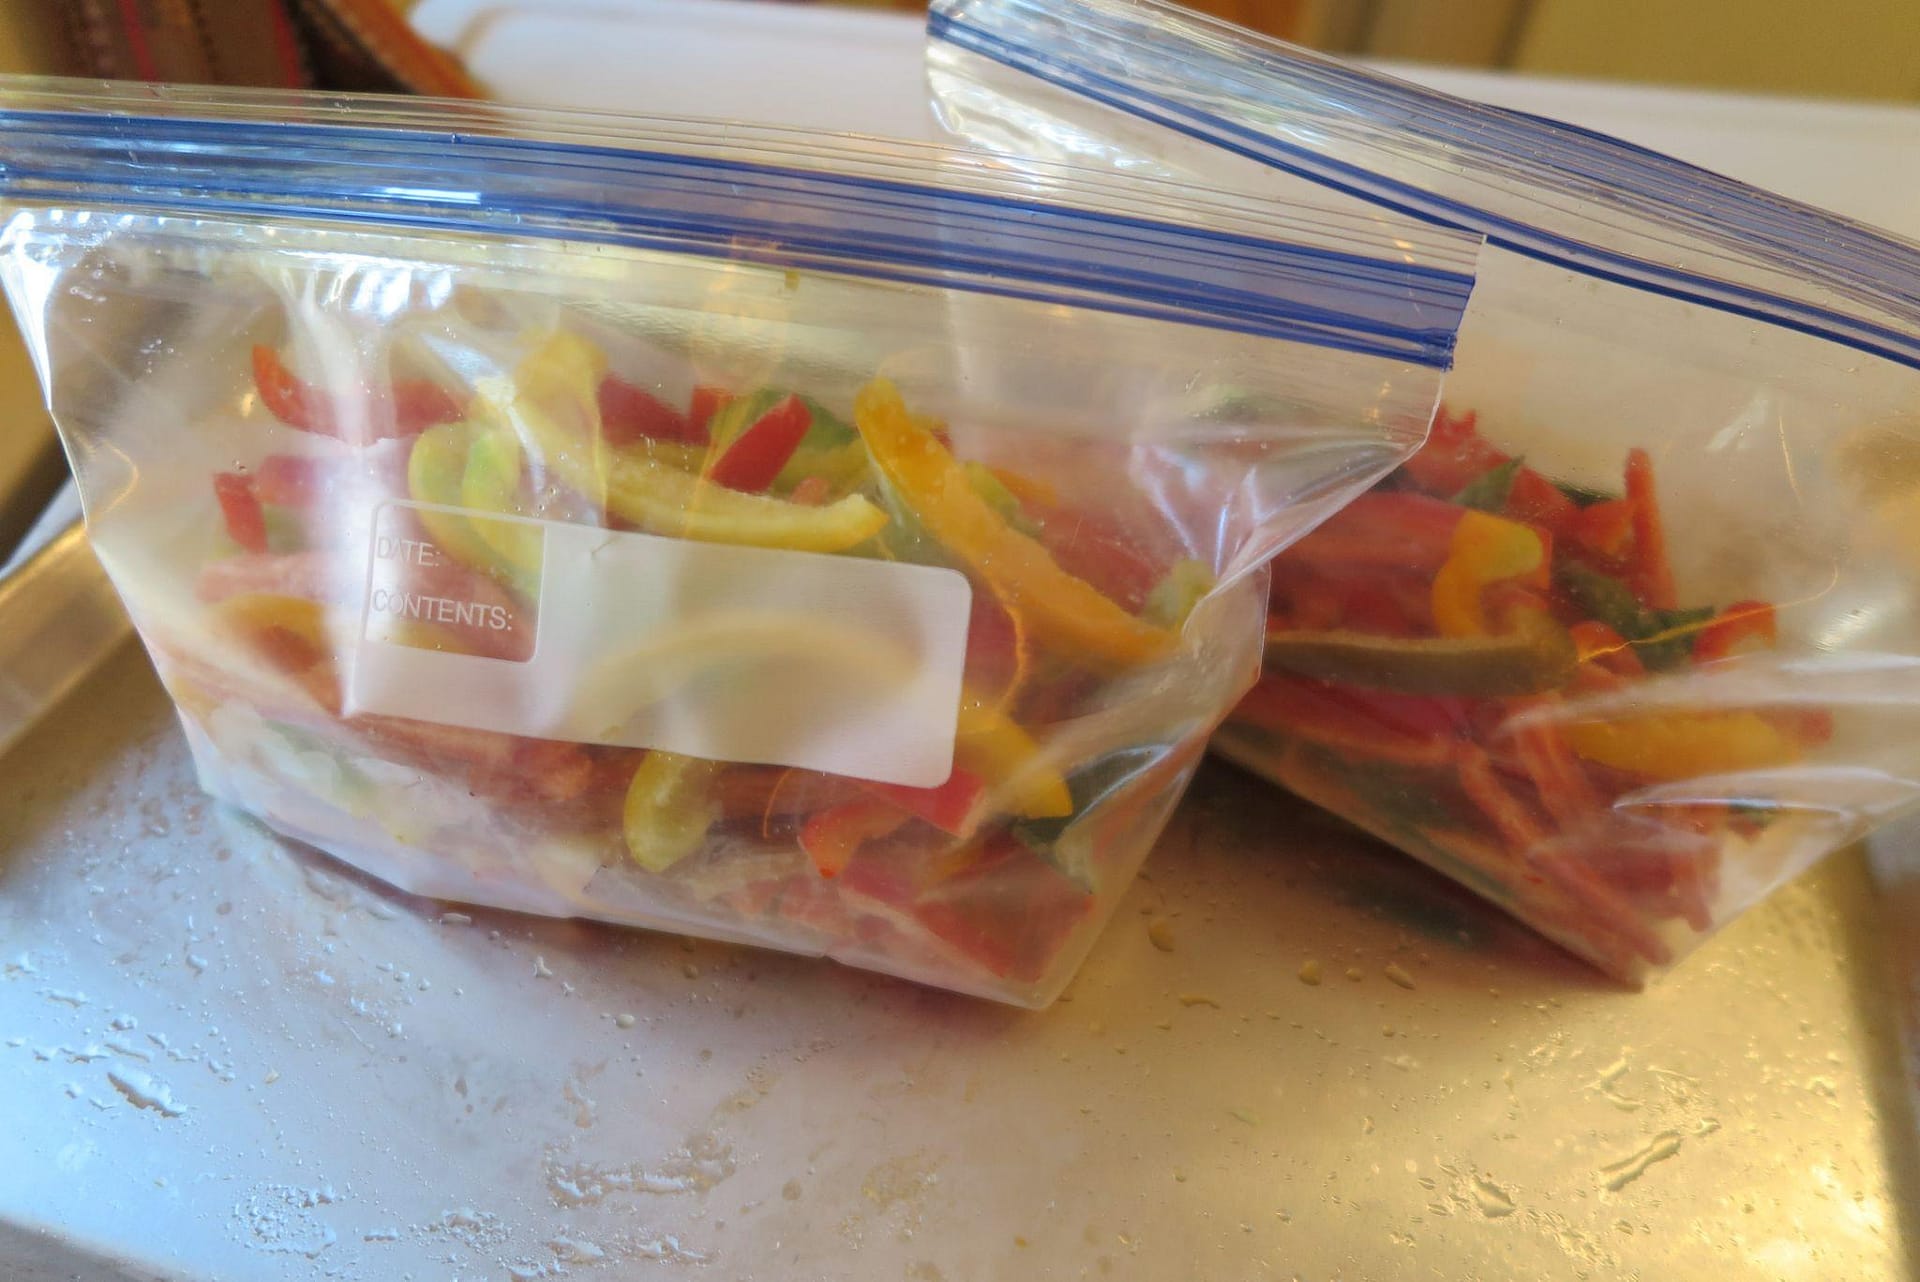 Ziploc bags of sliced bell peppers ready for the freezer